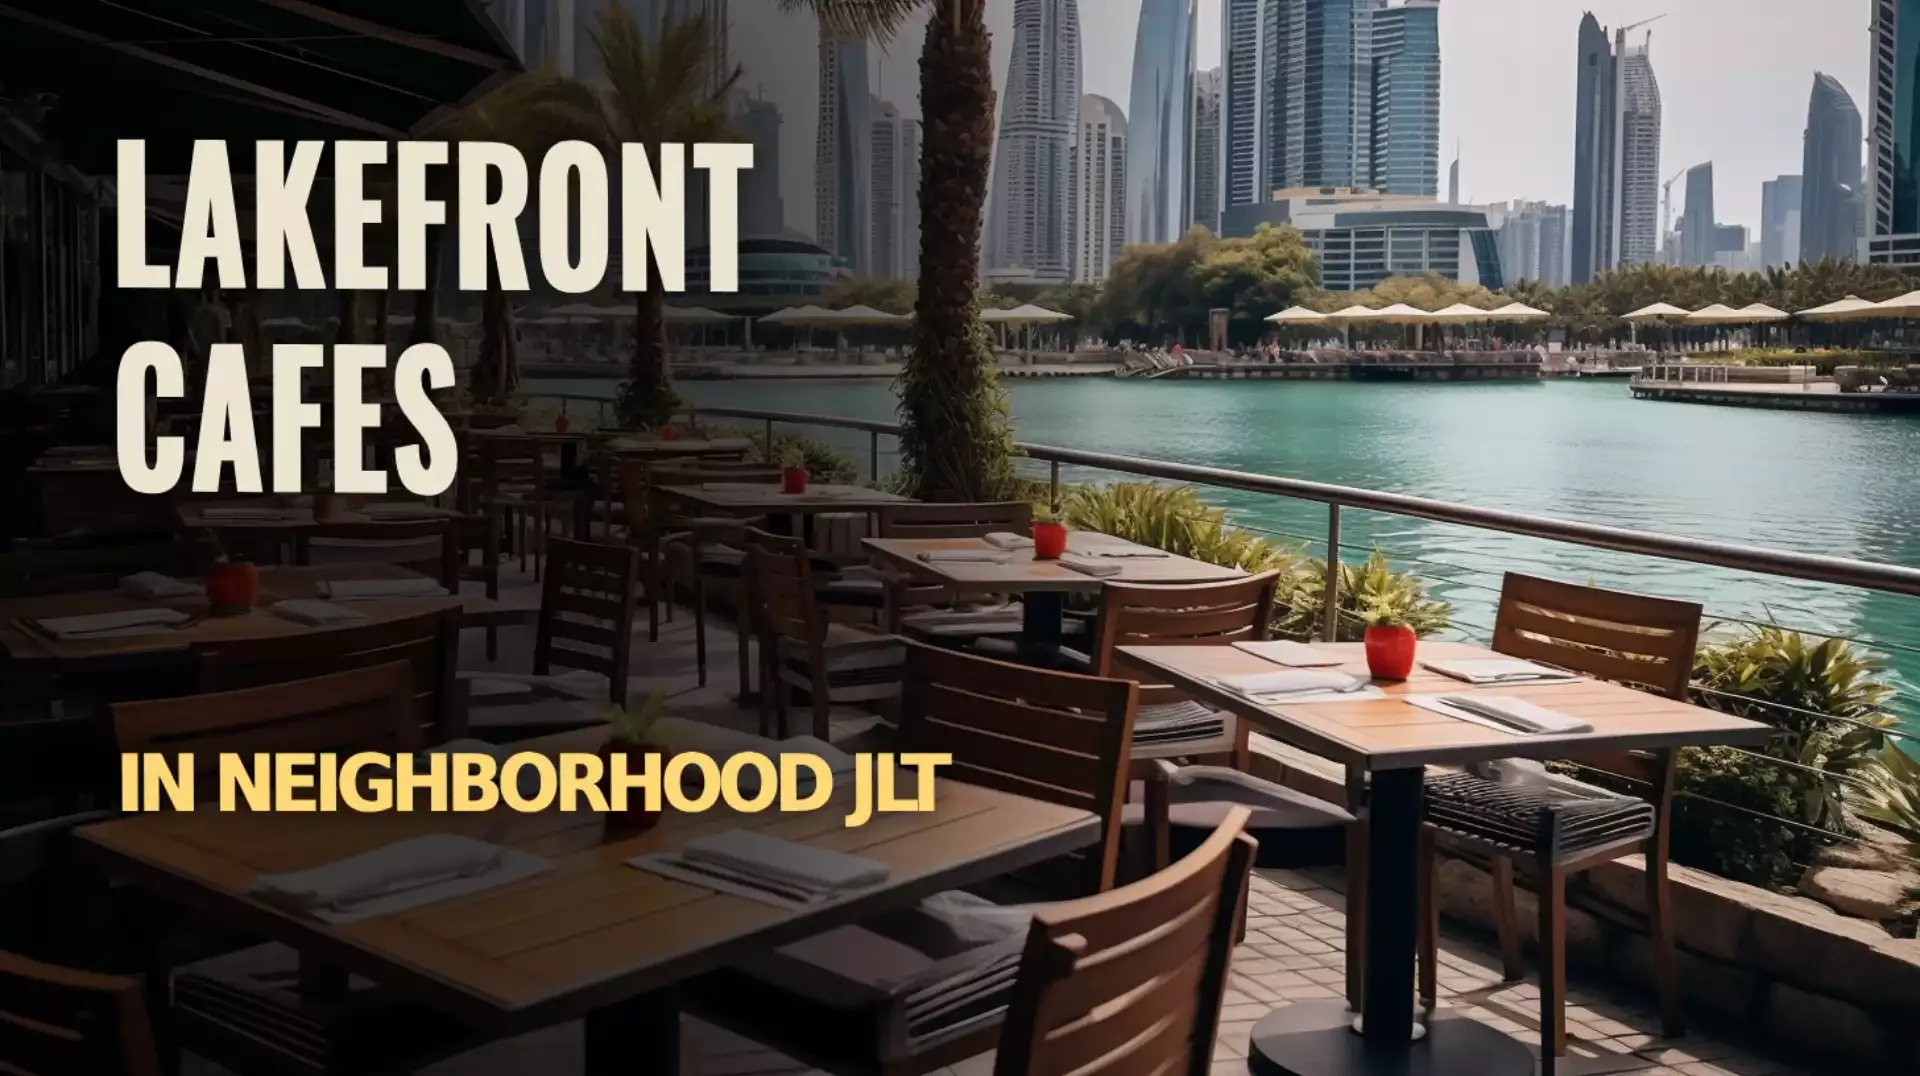 Serenity by the Water: Lakefront Cafes in JLT